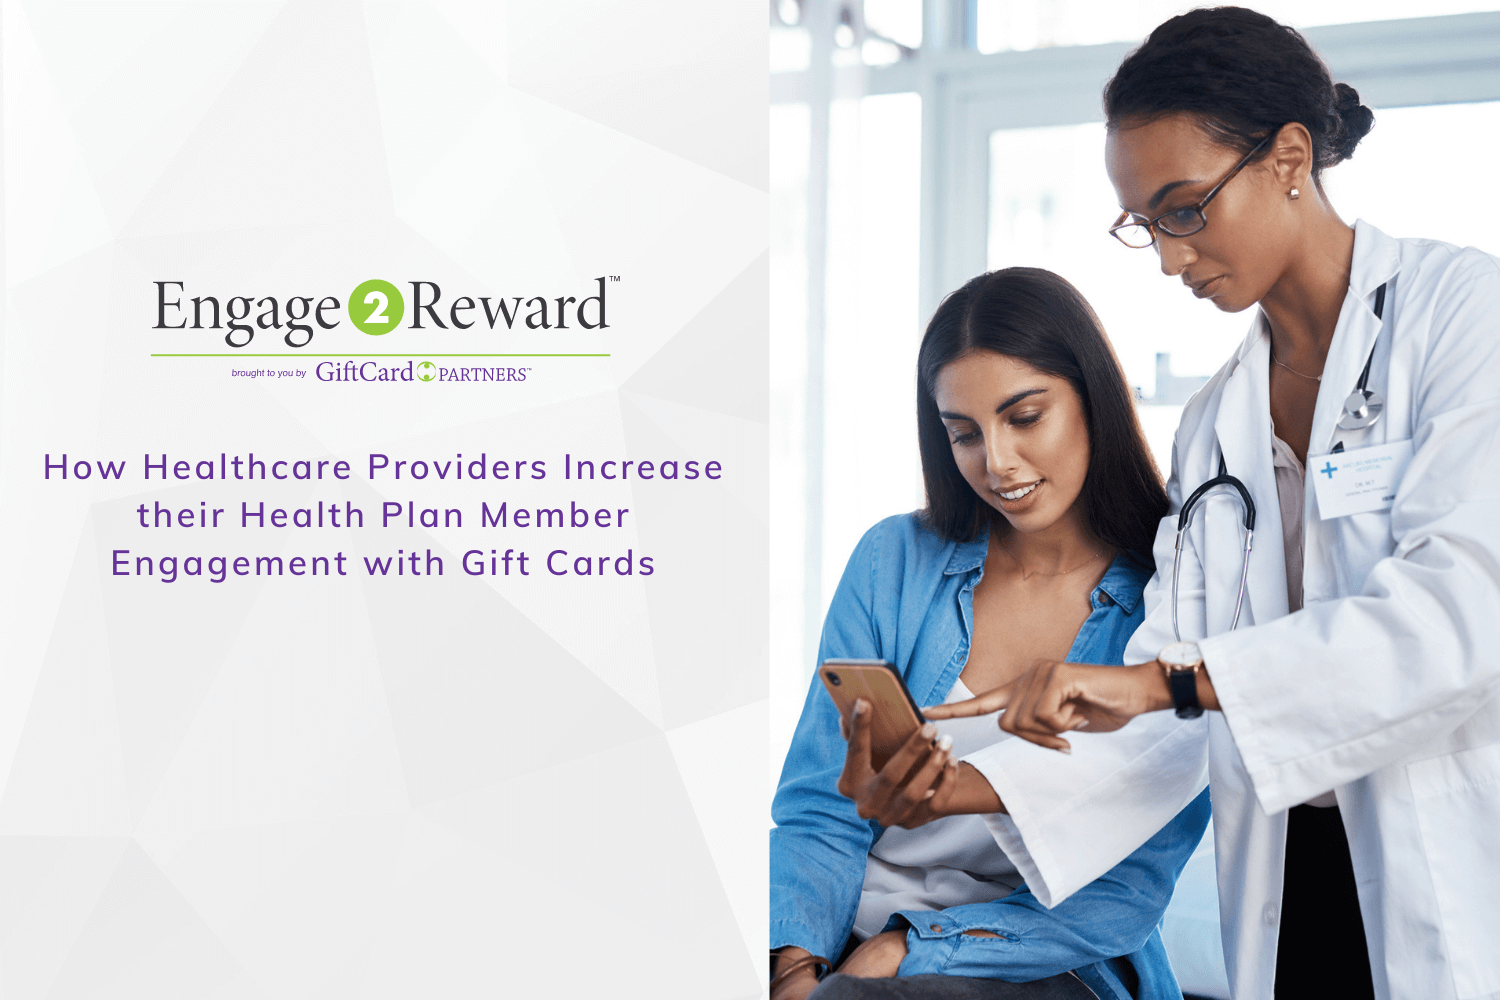 How Healthcare Providers Increase their Health Plan Member Engagement with Gift Cards